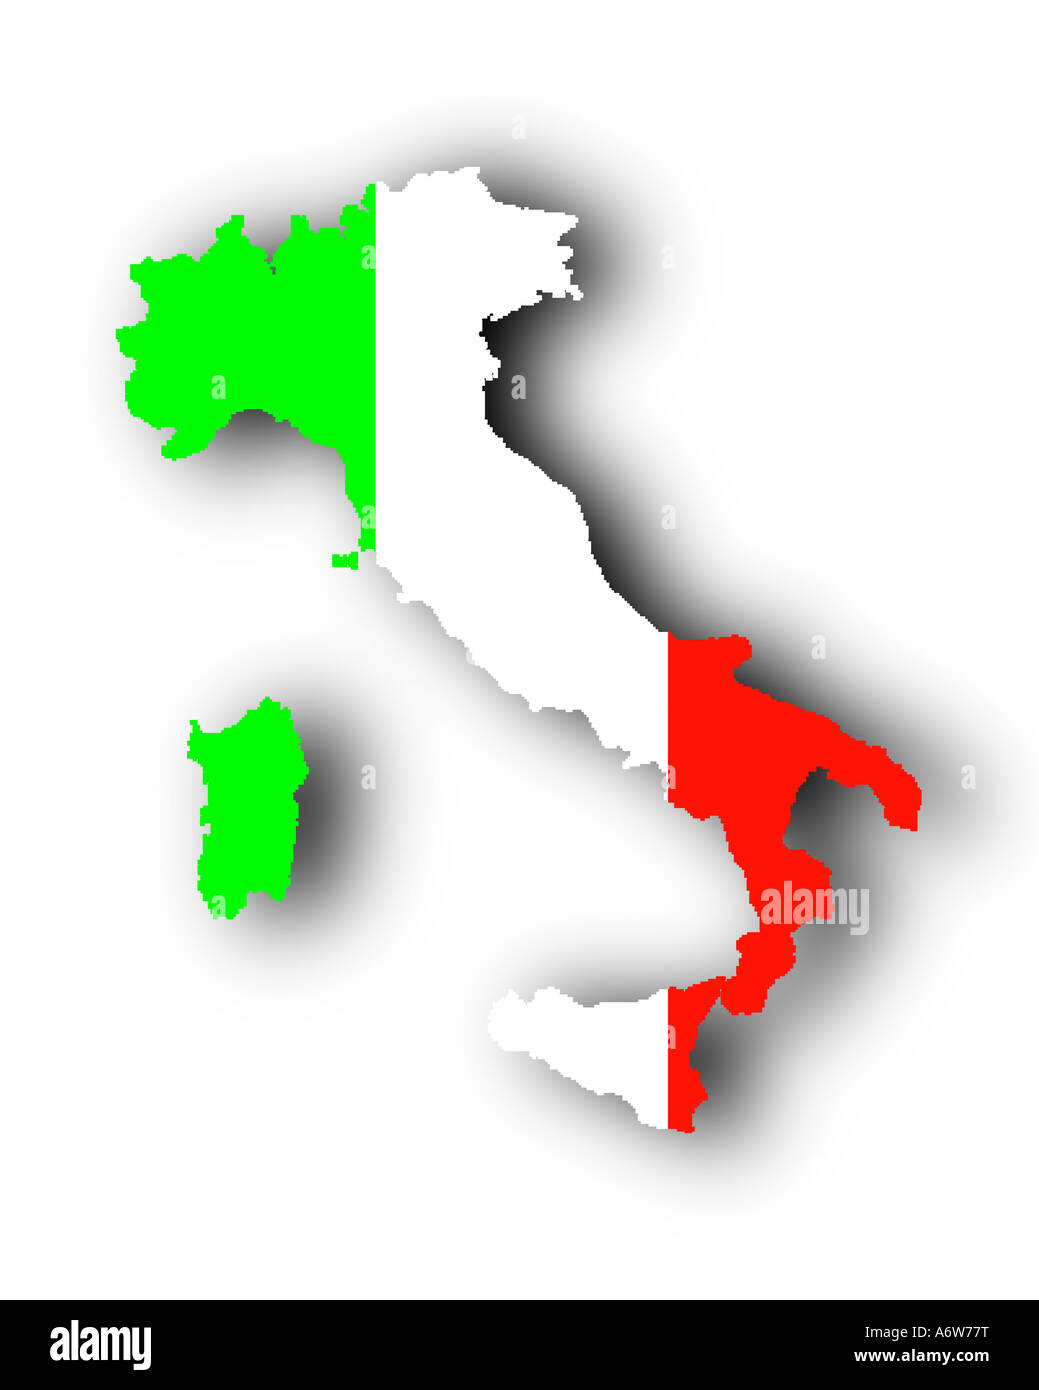 Flag of Italy Superimposed on a Map with drop shadow Illustration Stock Photo